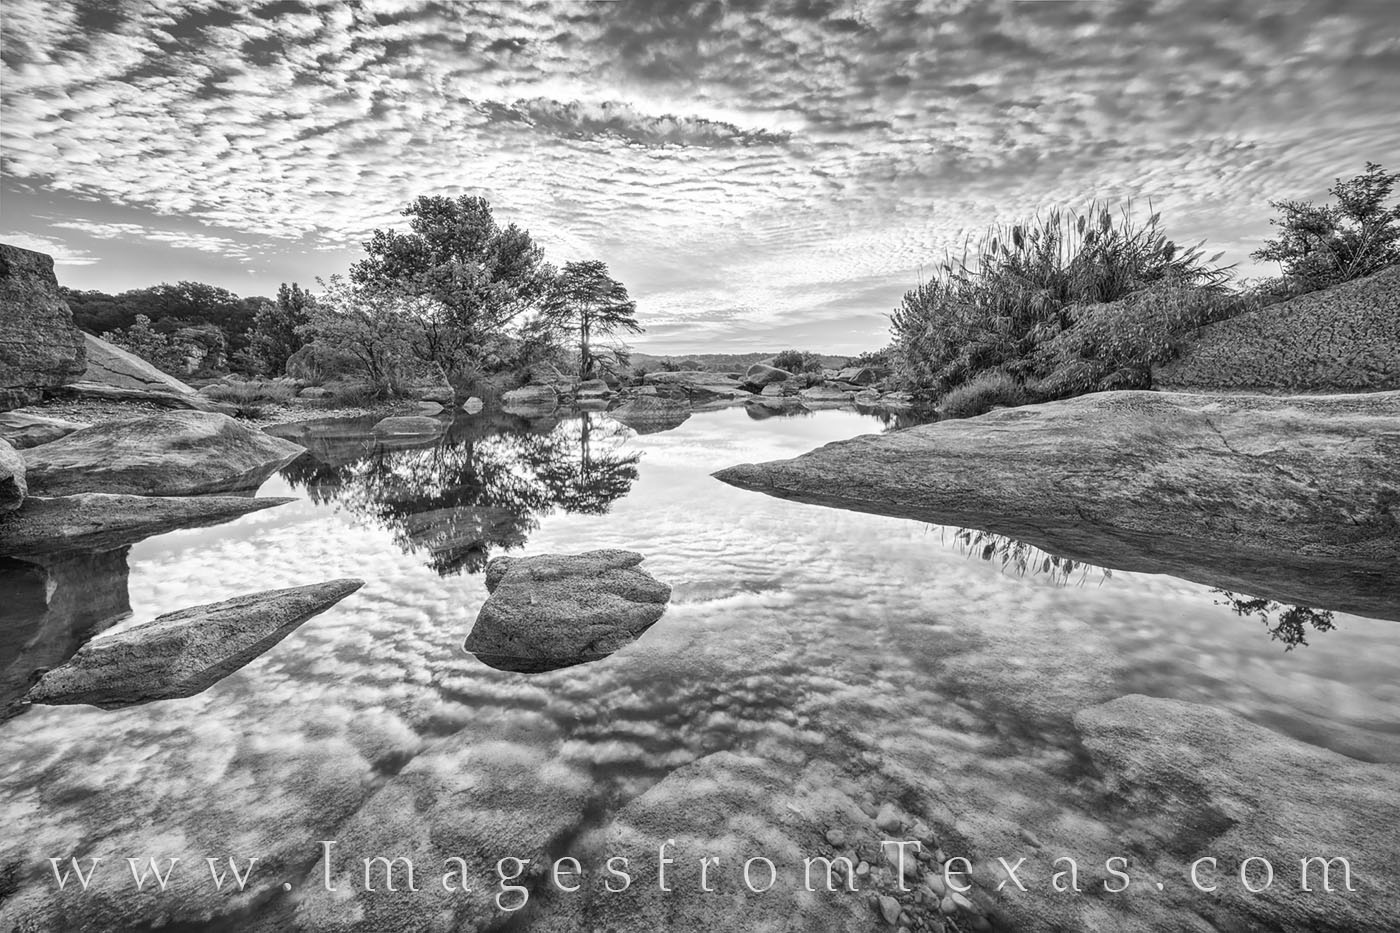 This black and white photograph comes from a perfect morning along the Pedernales River in the Texas Hill Country. The water...